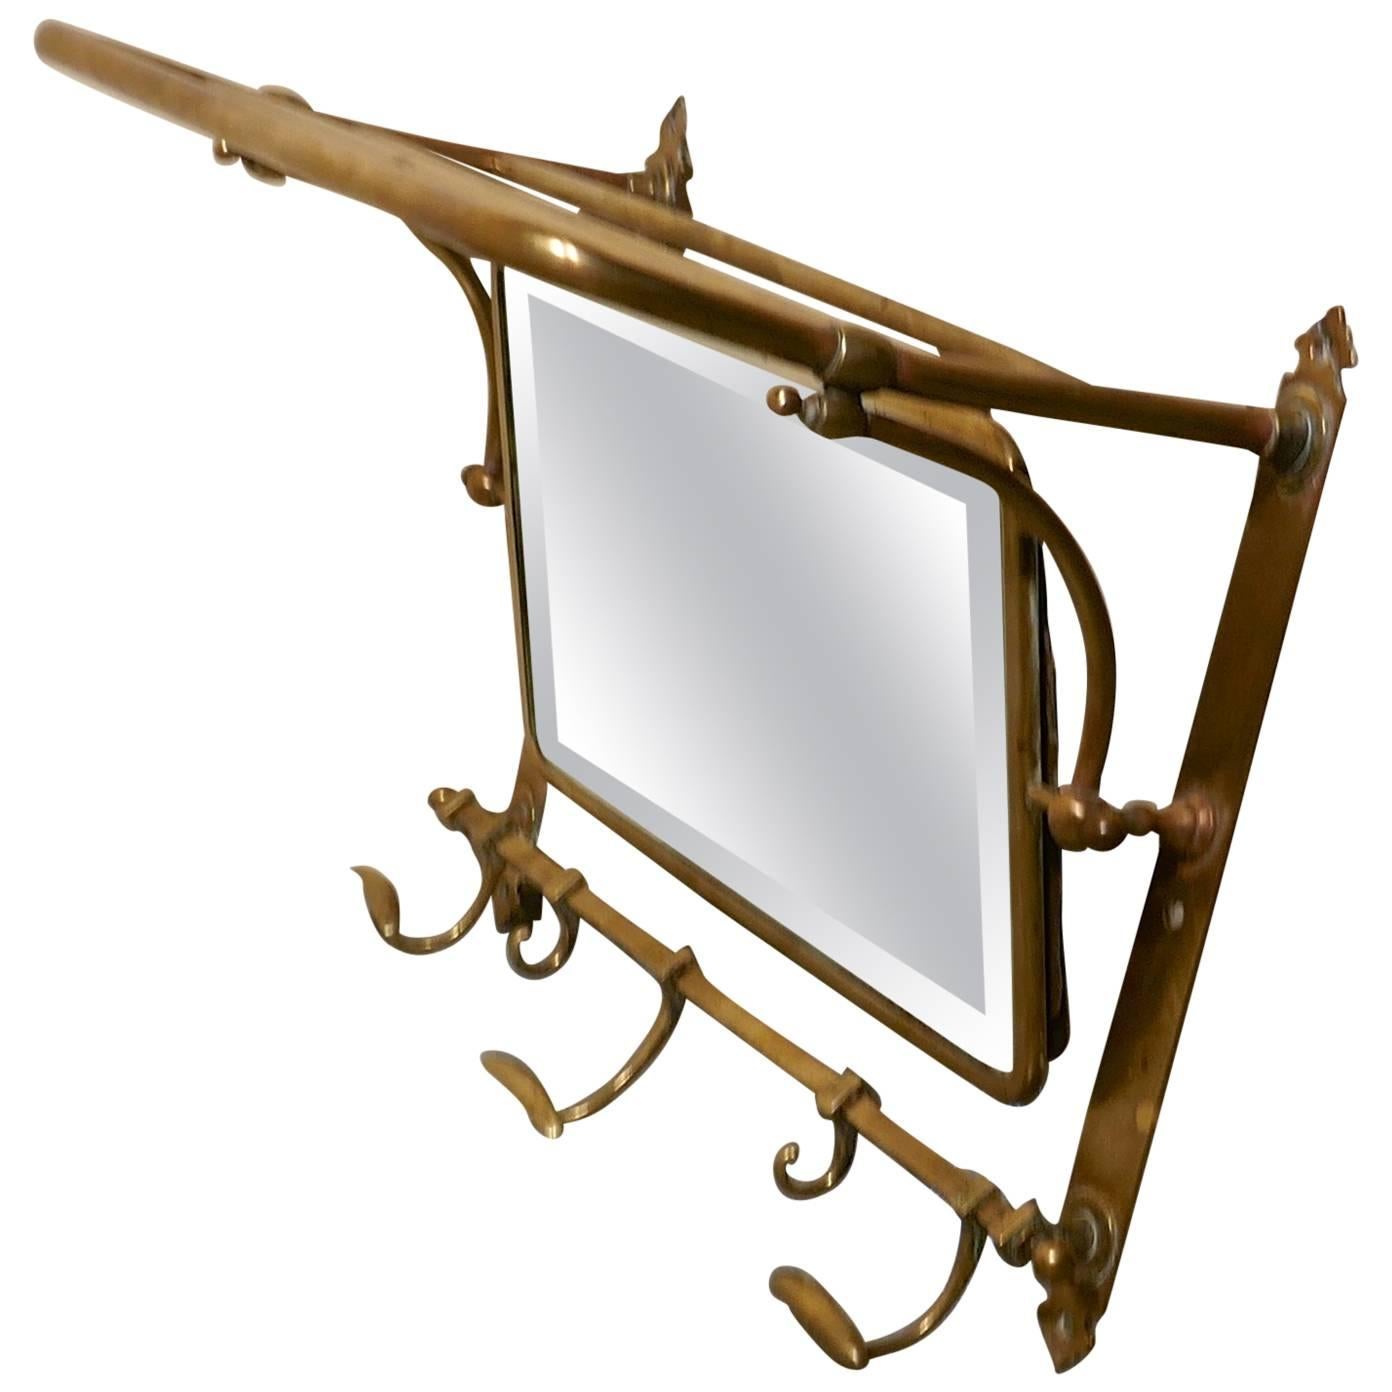 French Art Deco Brass Hat and Coat Shelf Mirror from a Railway Train